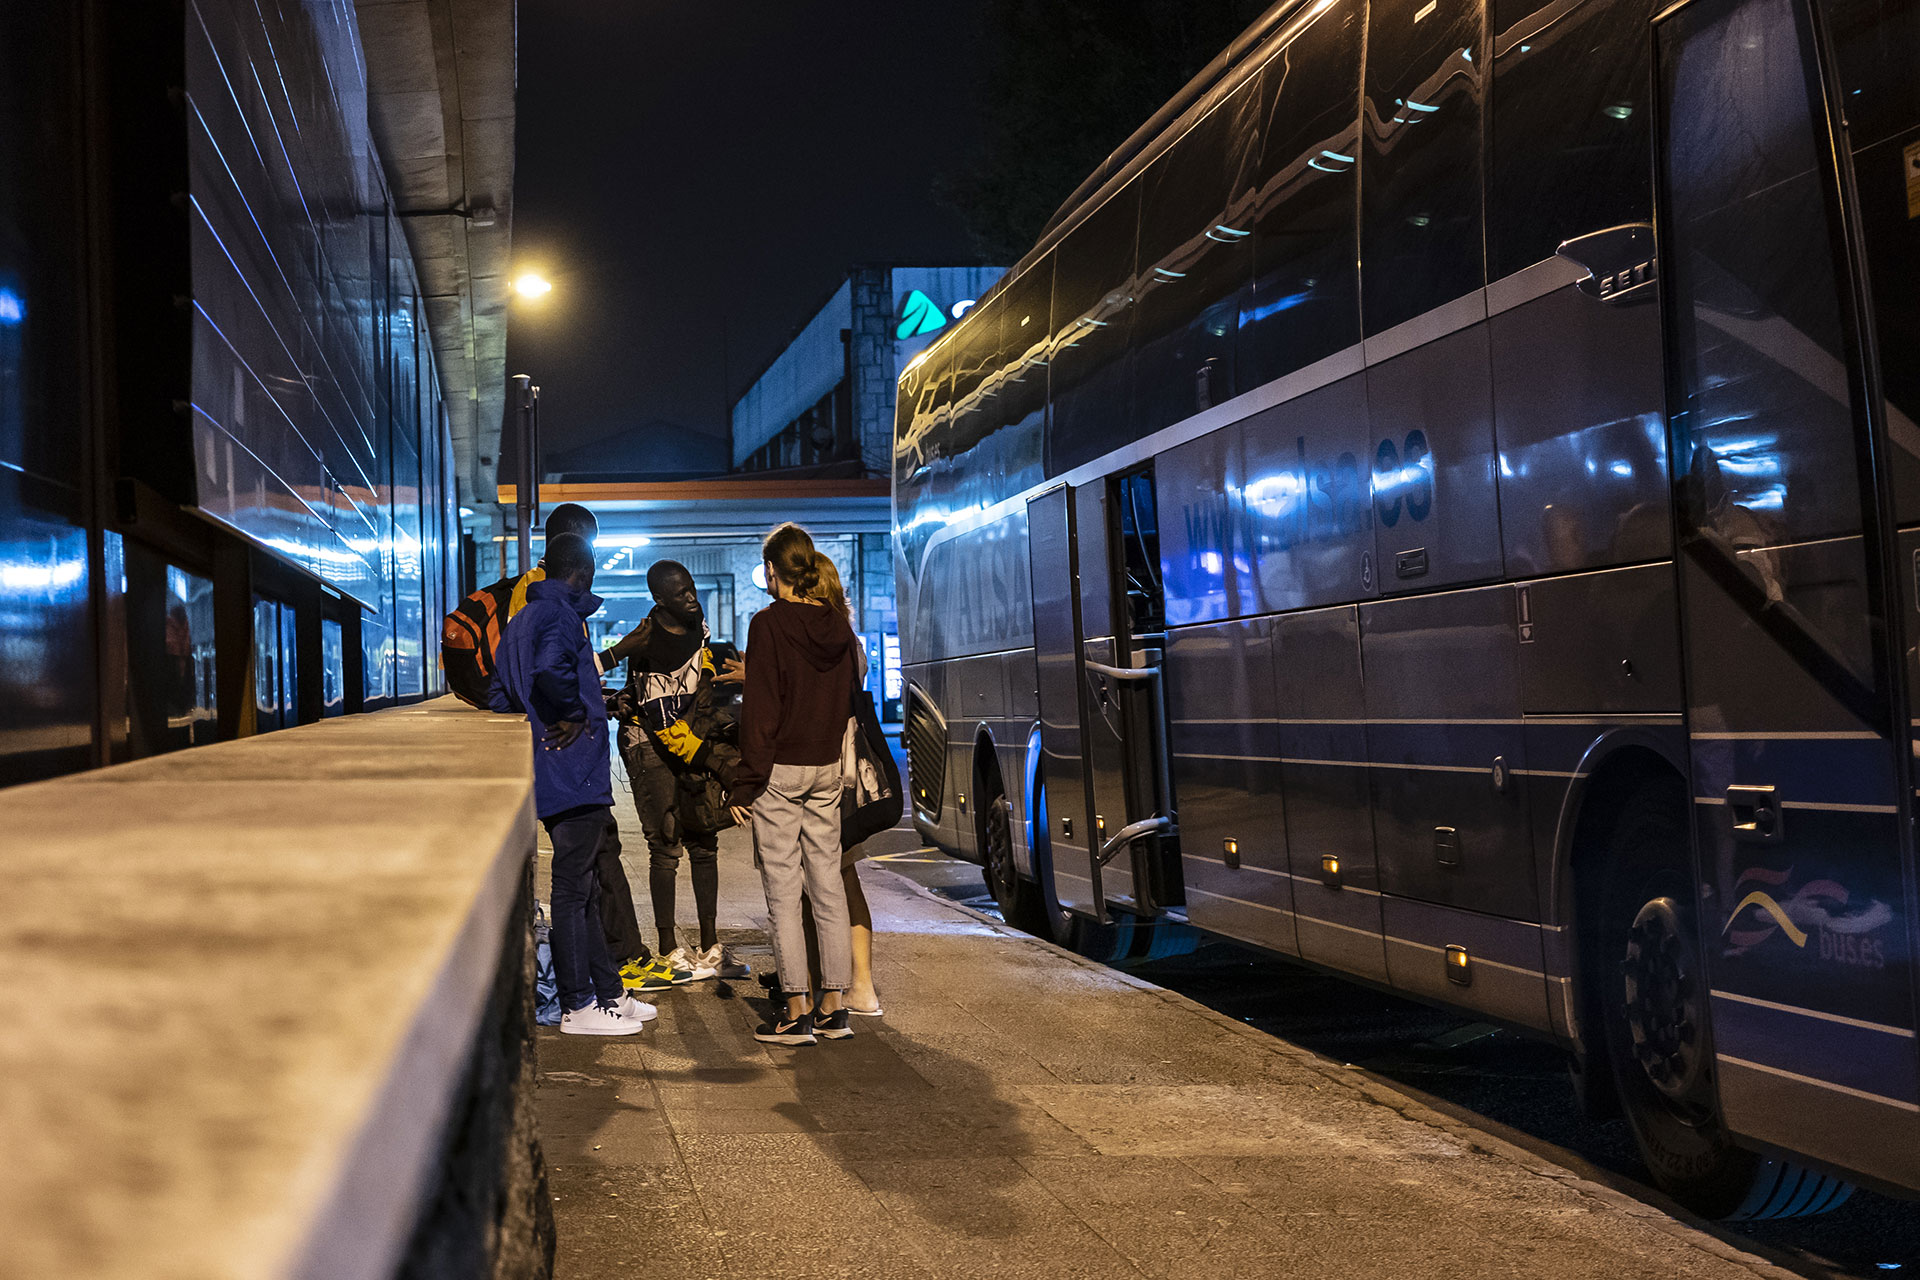 Members of Irungo Harrera Sarea talk to a young man who has just arrived at the Irún bus station, September 17, 2019.